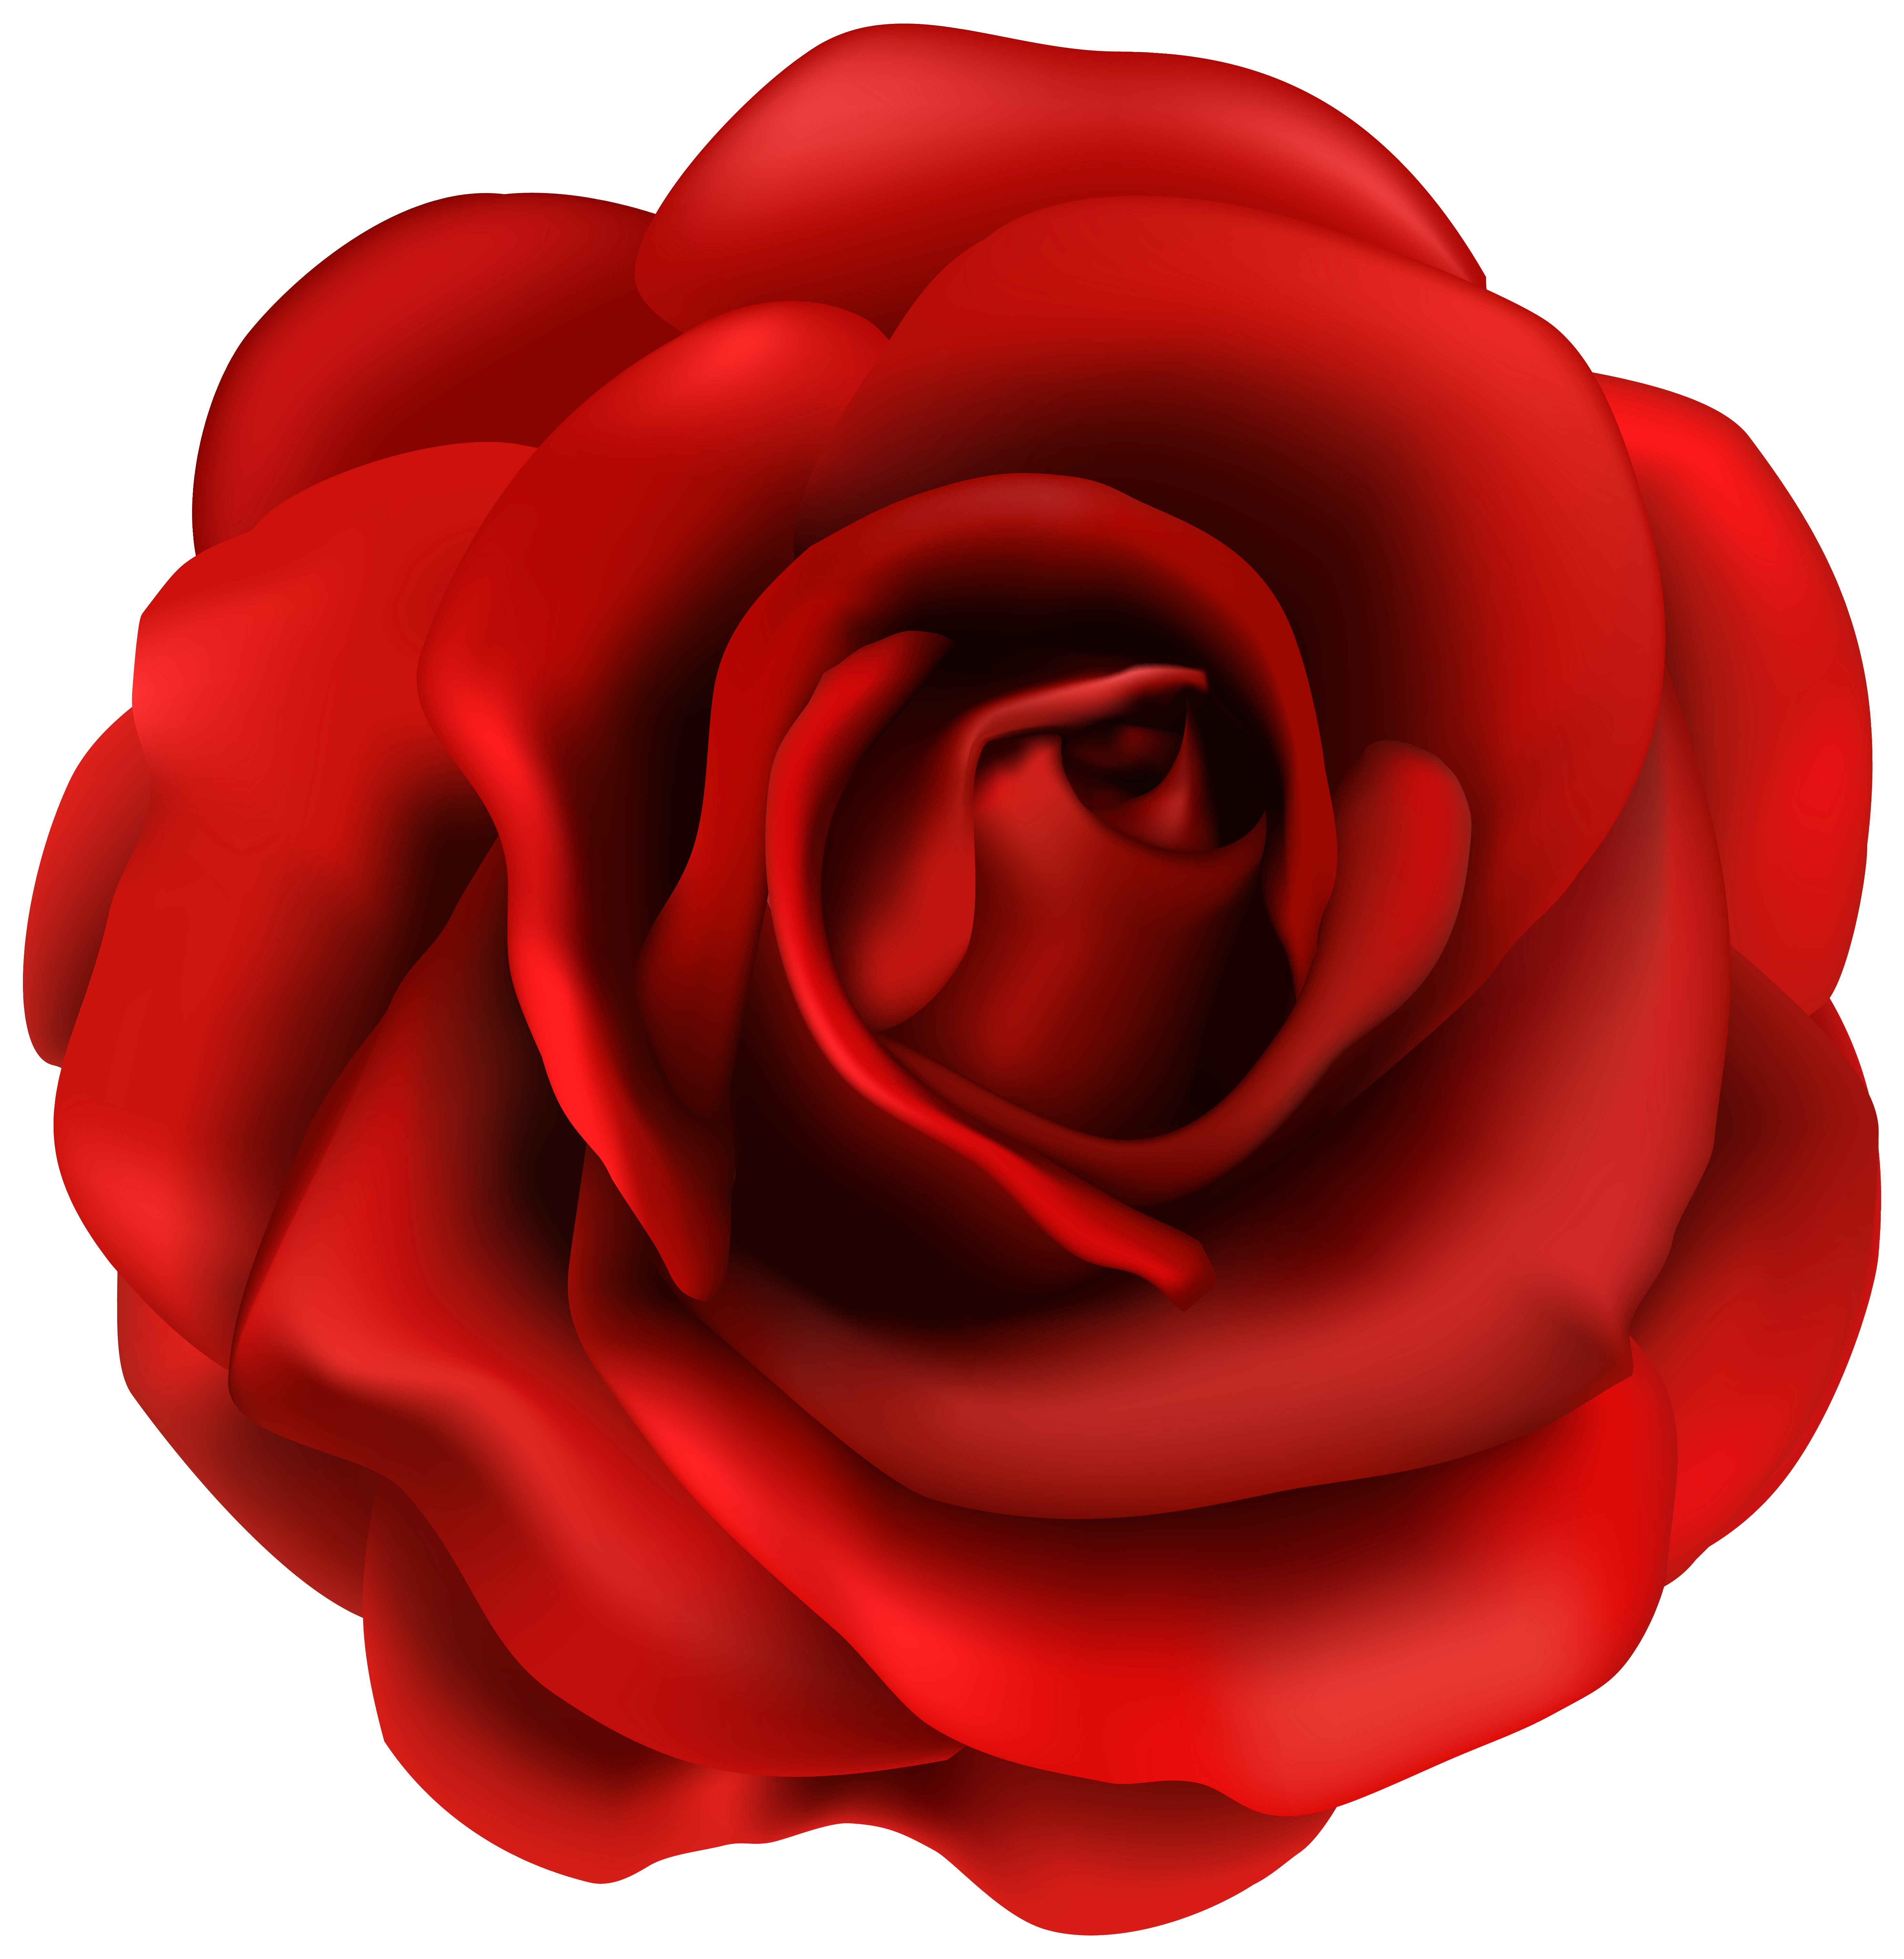 Flower png image gallery. Clipart rose red rose